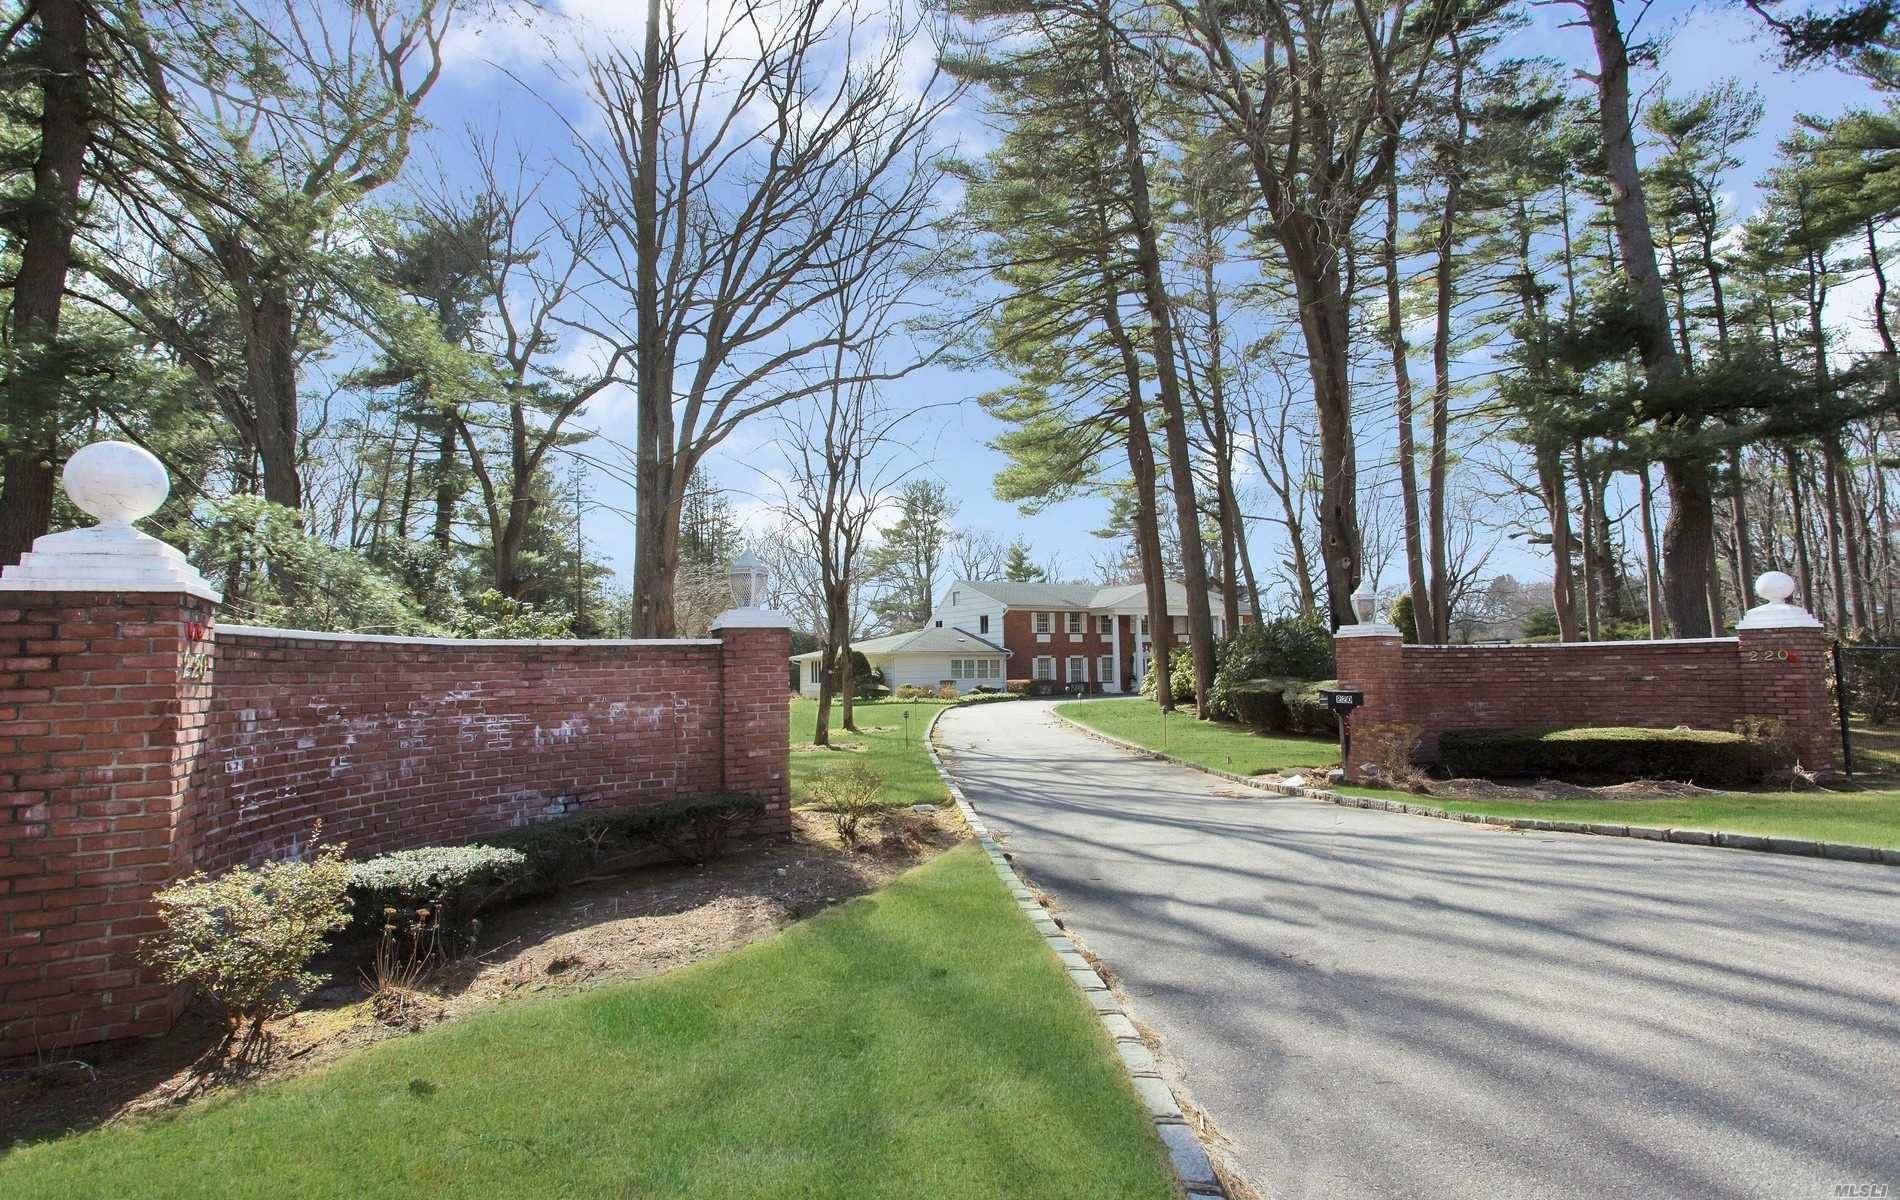 Gracious brick home sited on 2 magnificent acres in Old Westbury.